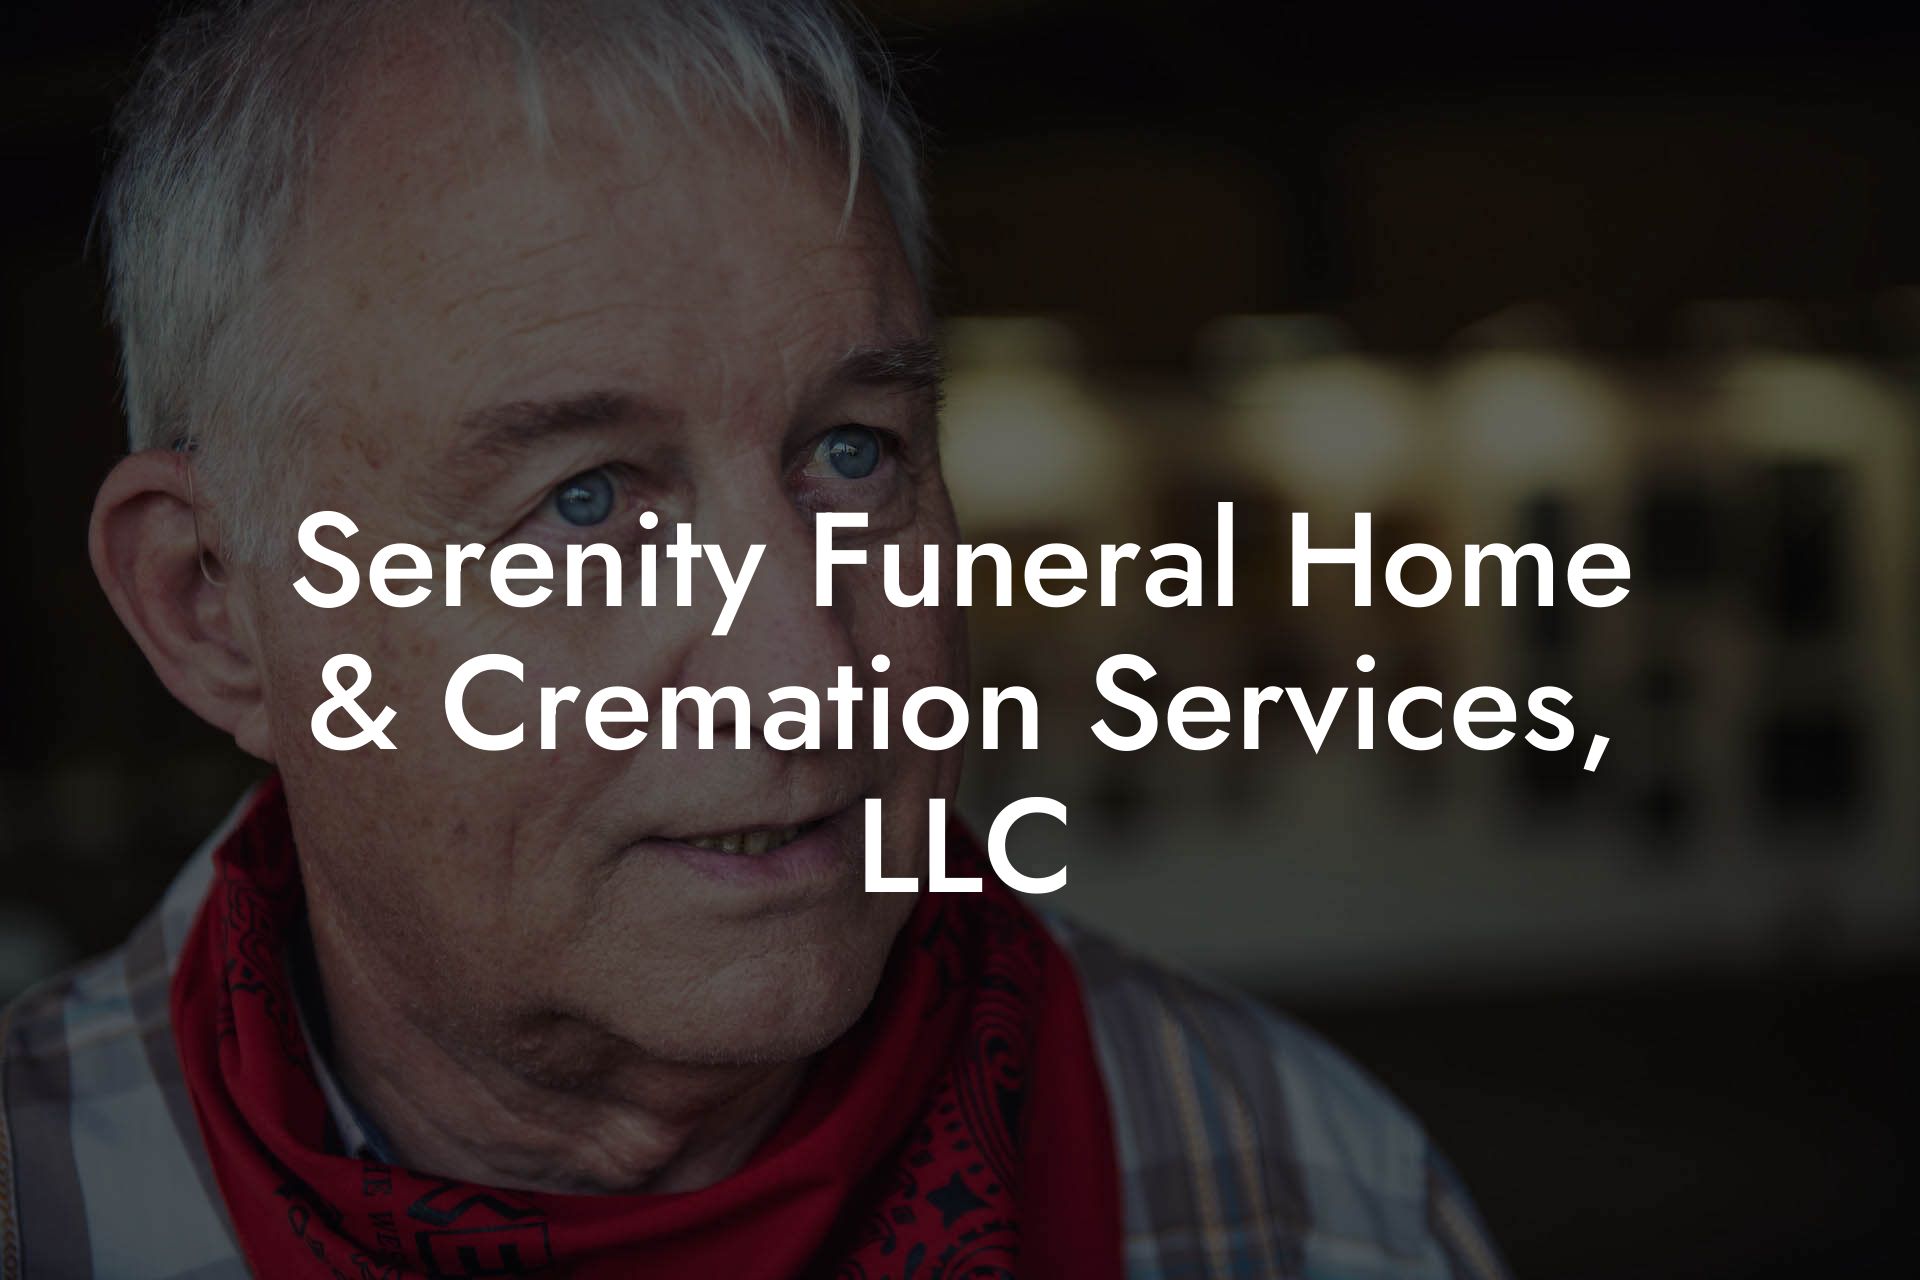 Serenity Funeral Home & Cremation Services, LLC